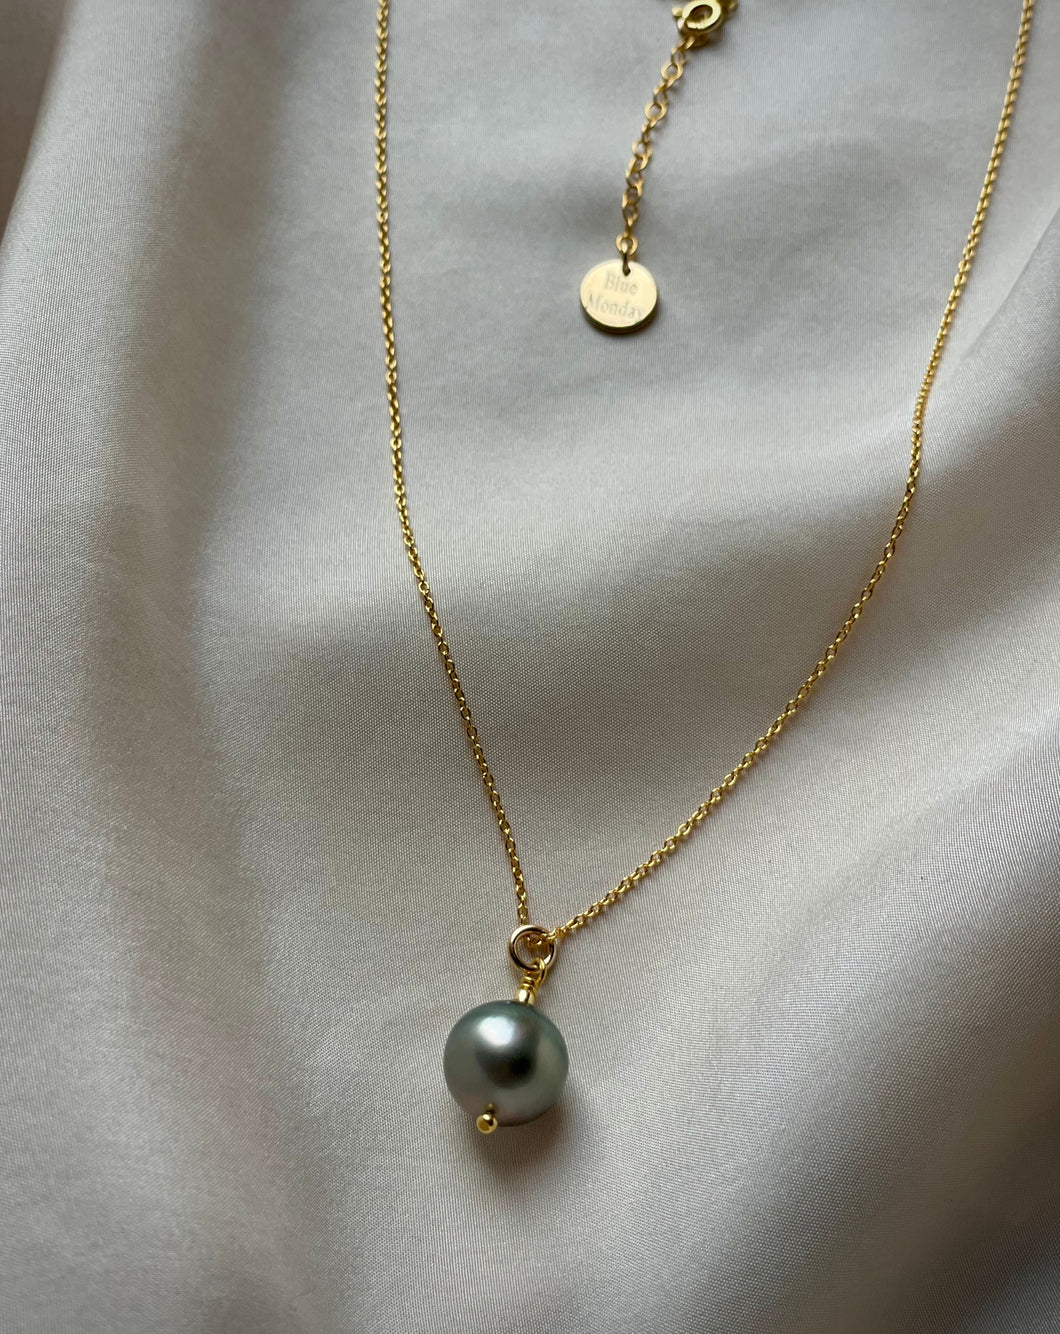 Exclusive South sea pearl Necklace in Gold and Grey natural finish